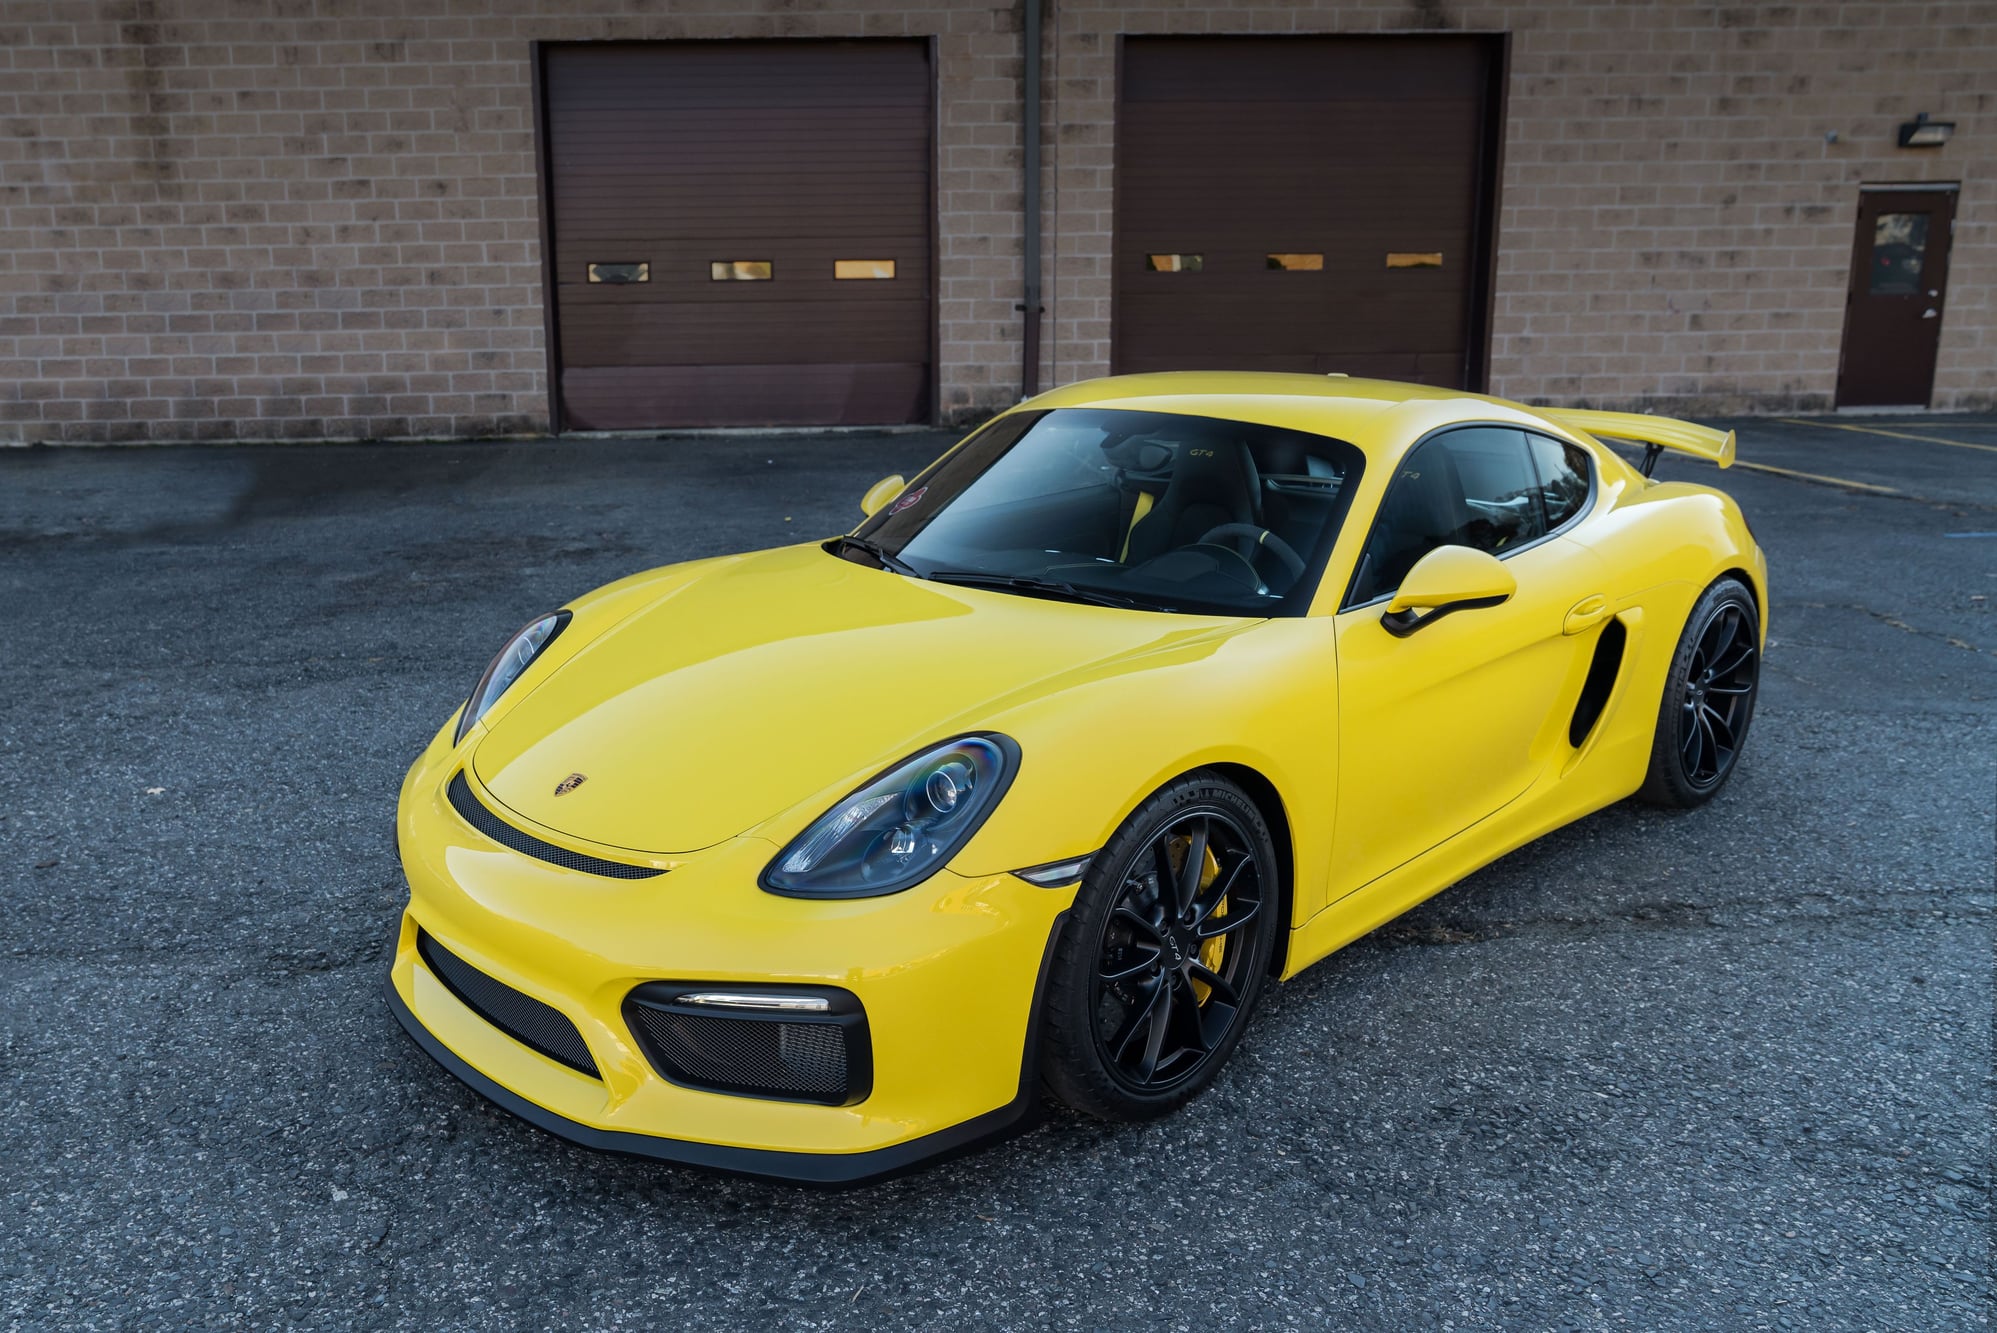 2016 Porsche Cayman GT4 - Highly optioned GT4 for sale - Used - VIN WP0AC2A8XGK191971 - 3,465 Miles - 6 cyl - 2WD - Manual - Coupe - Yellow - Wyckoff, NJ 07481, United States